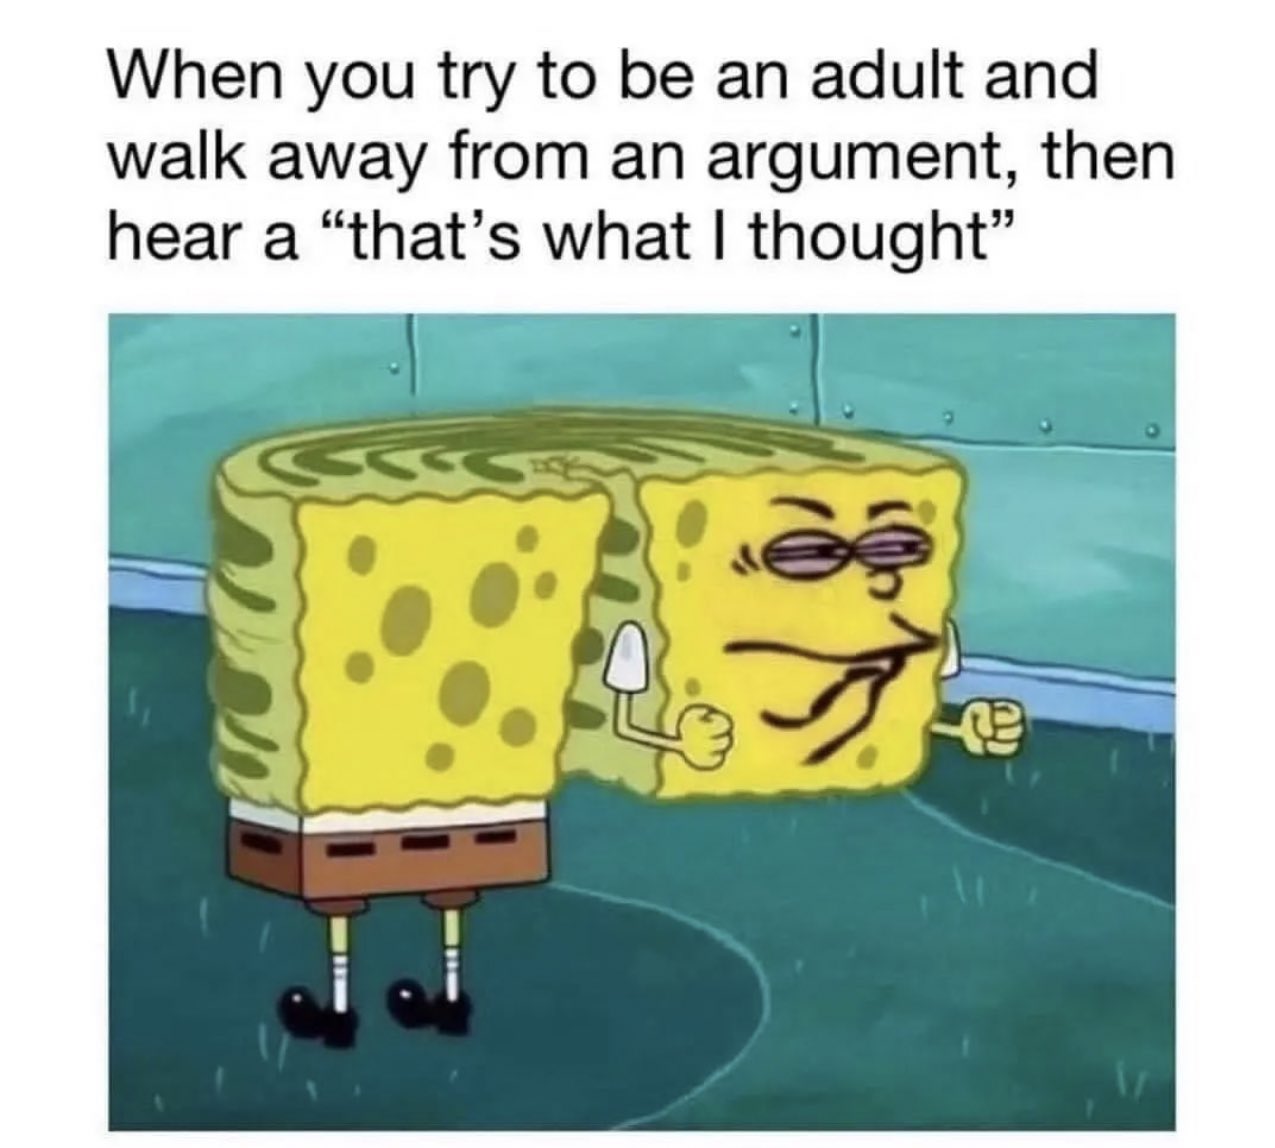 daily dose of pics and memes - you walk away from an argument - When you try to be an adult and walk away from an argument, then hear a "that's what I thought"